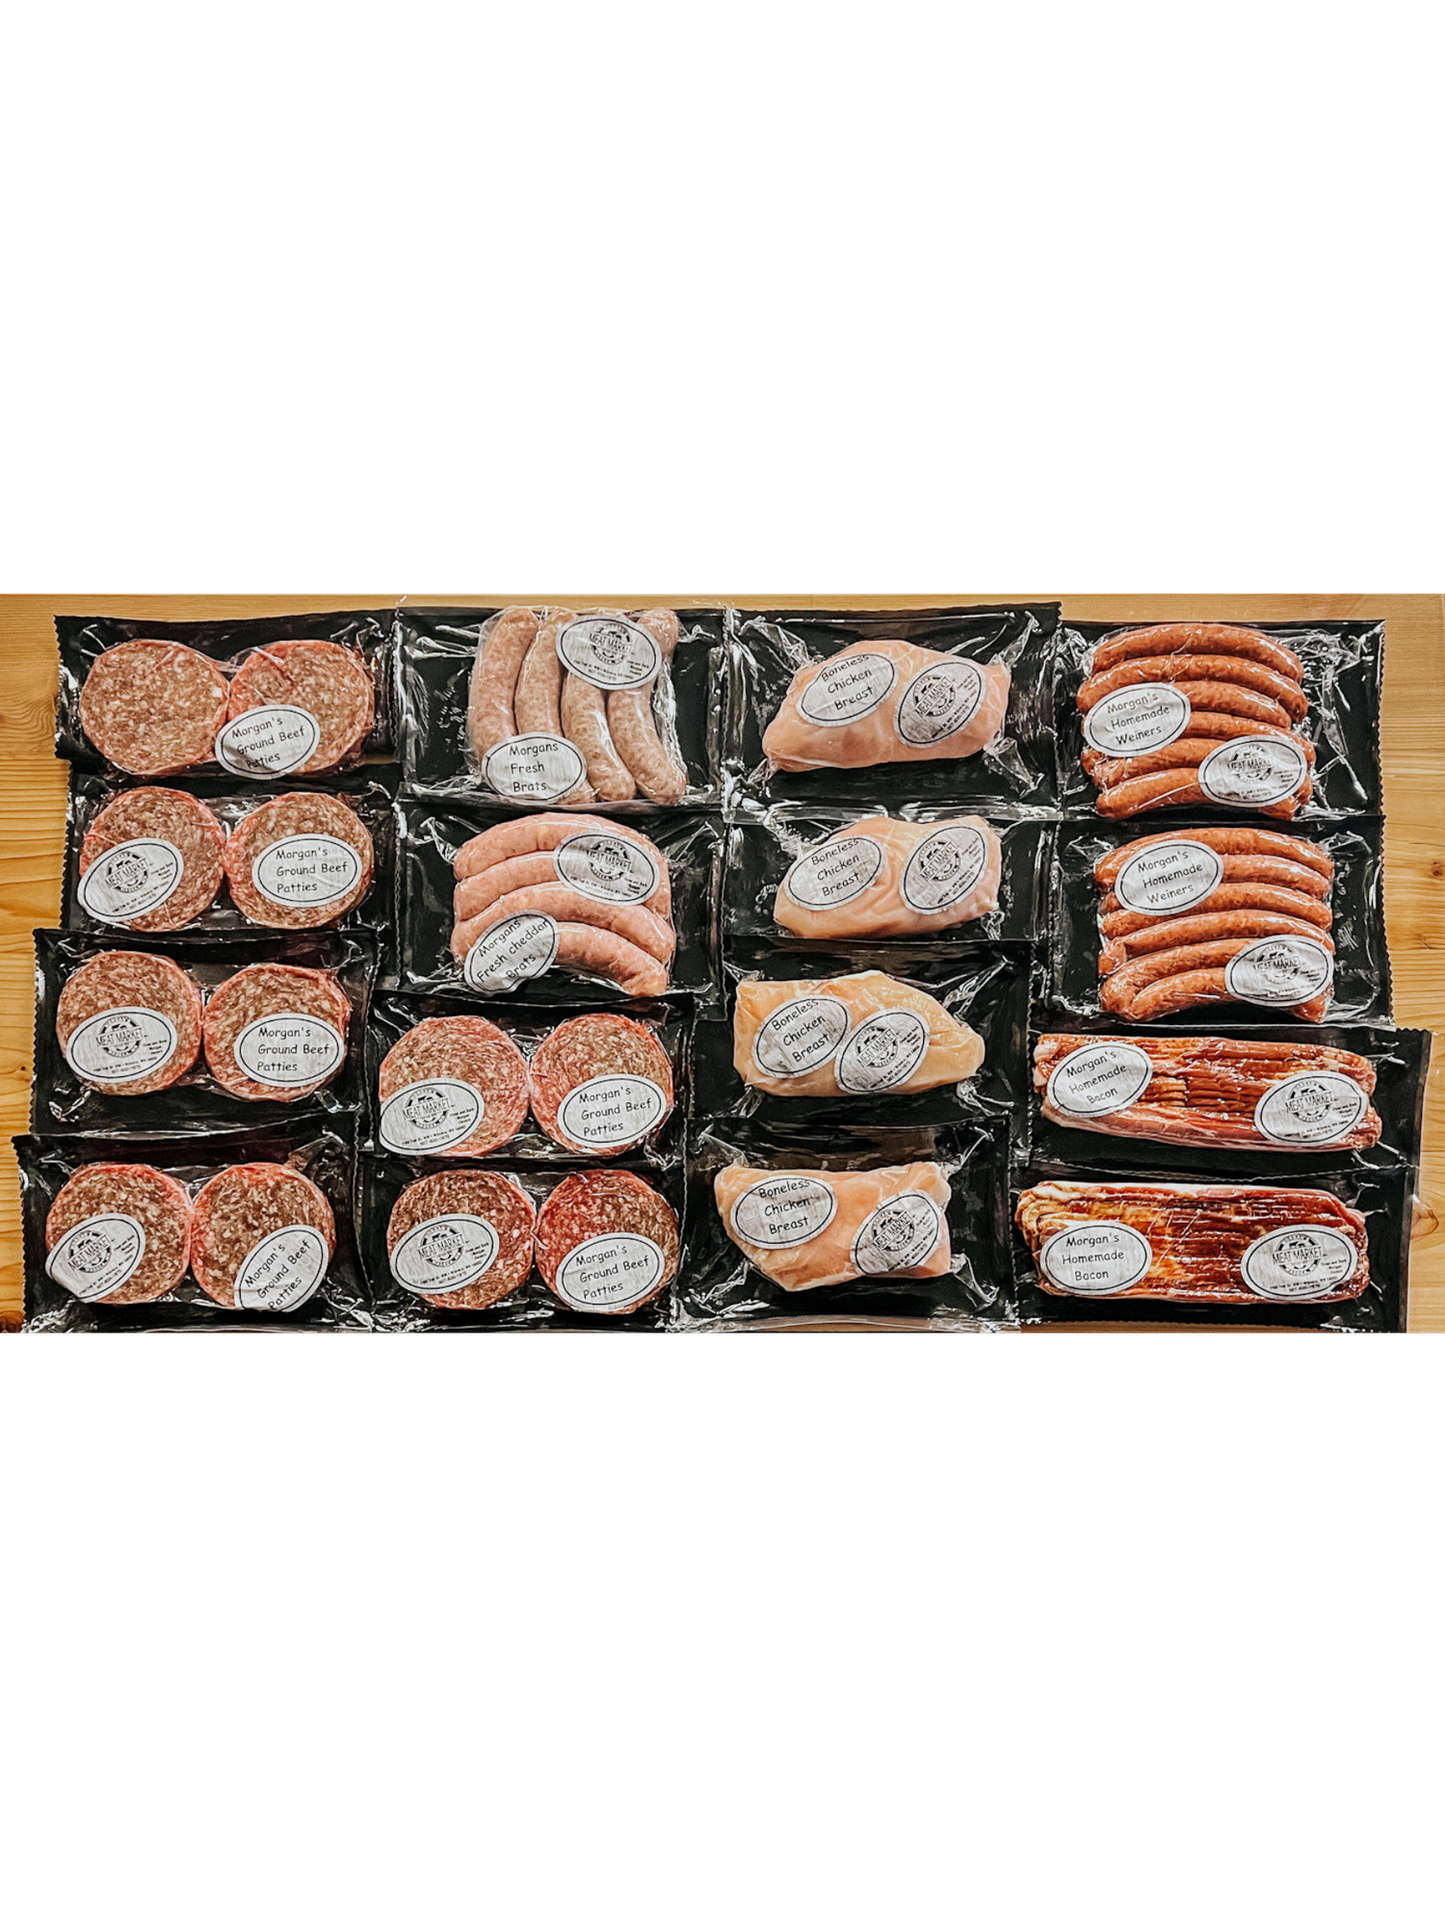 Family Grill Box including 1 Original Brats Pack of 4, 1 Specialty Brats Pack of 4, 2 Original Hickory Smoked Bacon 1 lb Packages, 4 Chicken Breasts, 2 Wieners Pack of 6, 12 Ground Beef 1/4 lb Patties